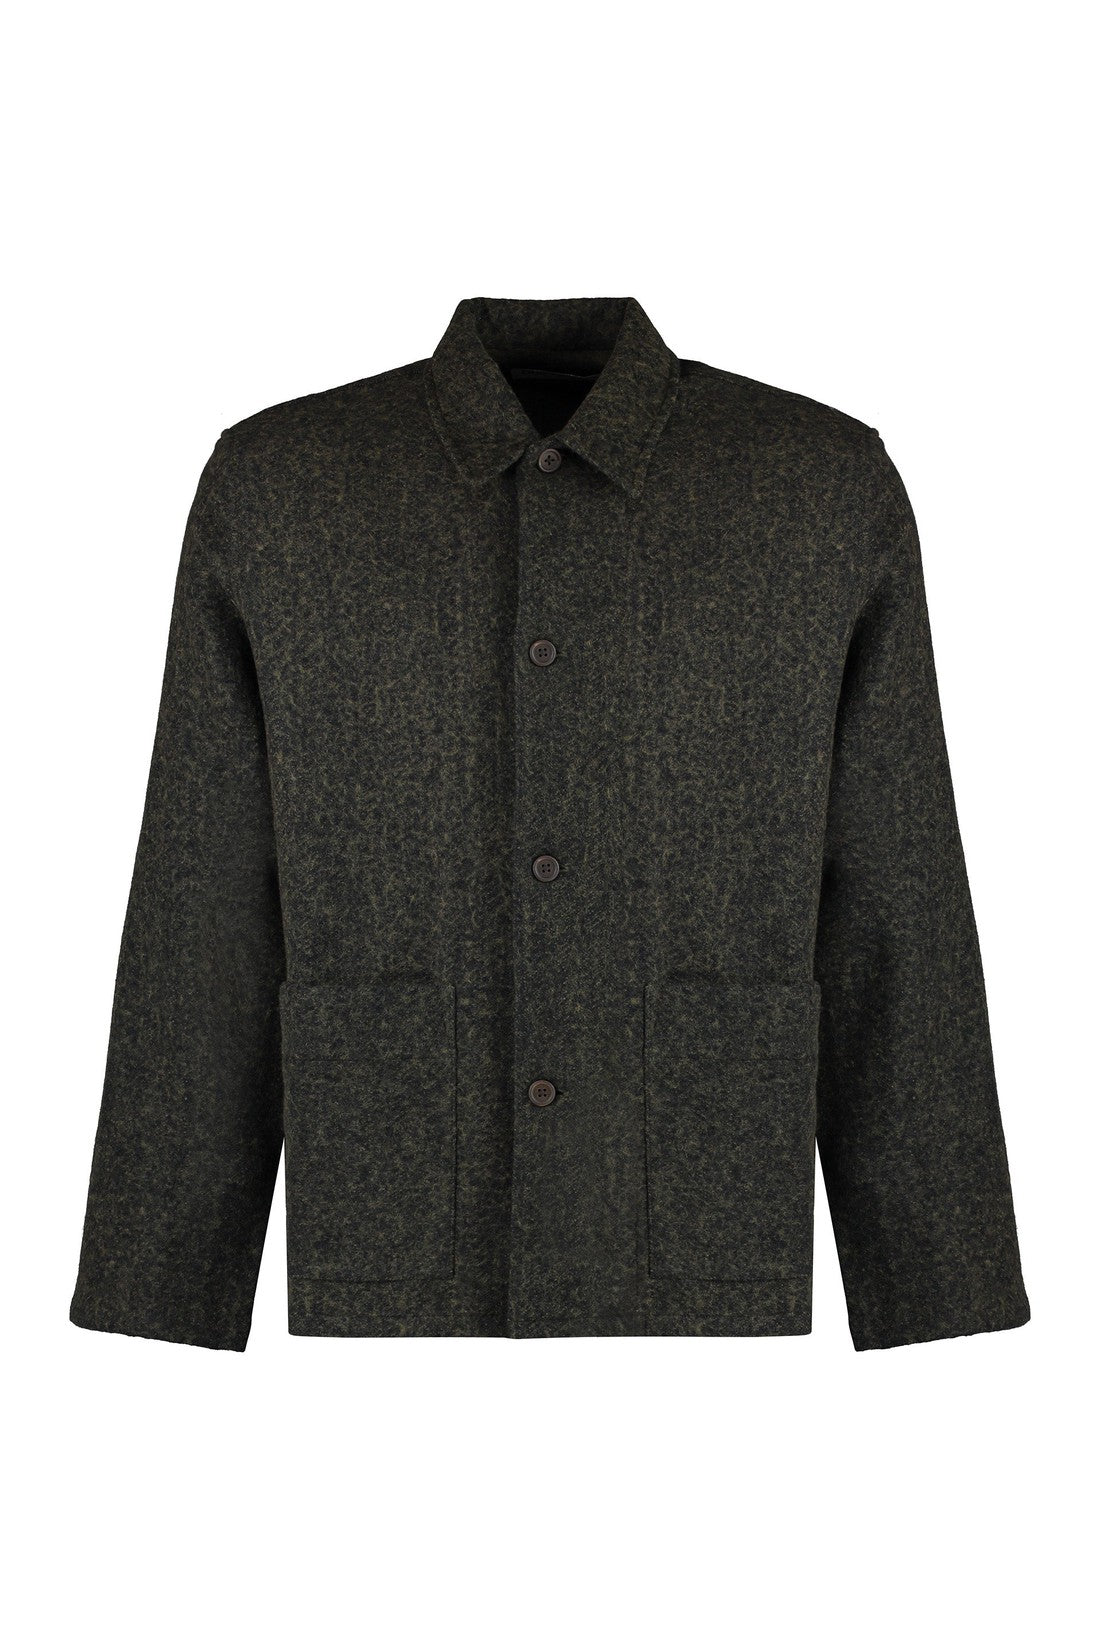 Our Legacy-OUTLET-SALE-Wool overshirt-ARCHIVIST